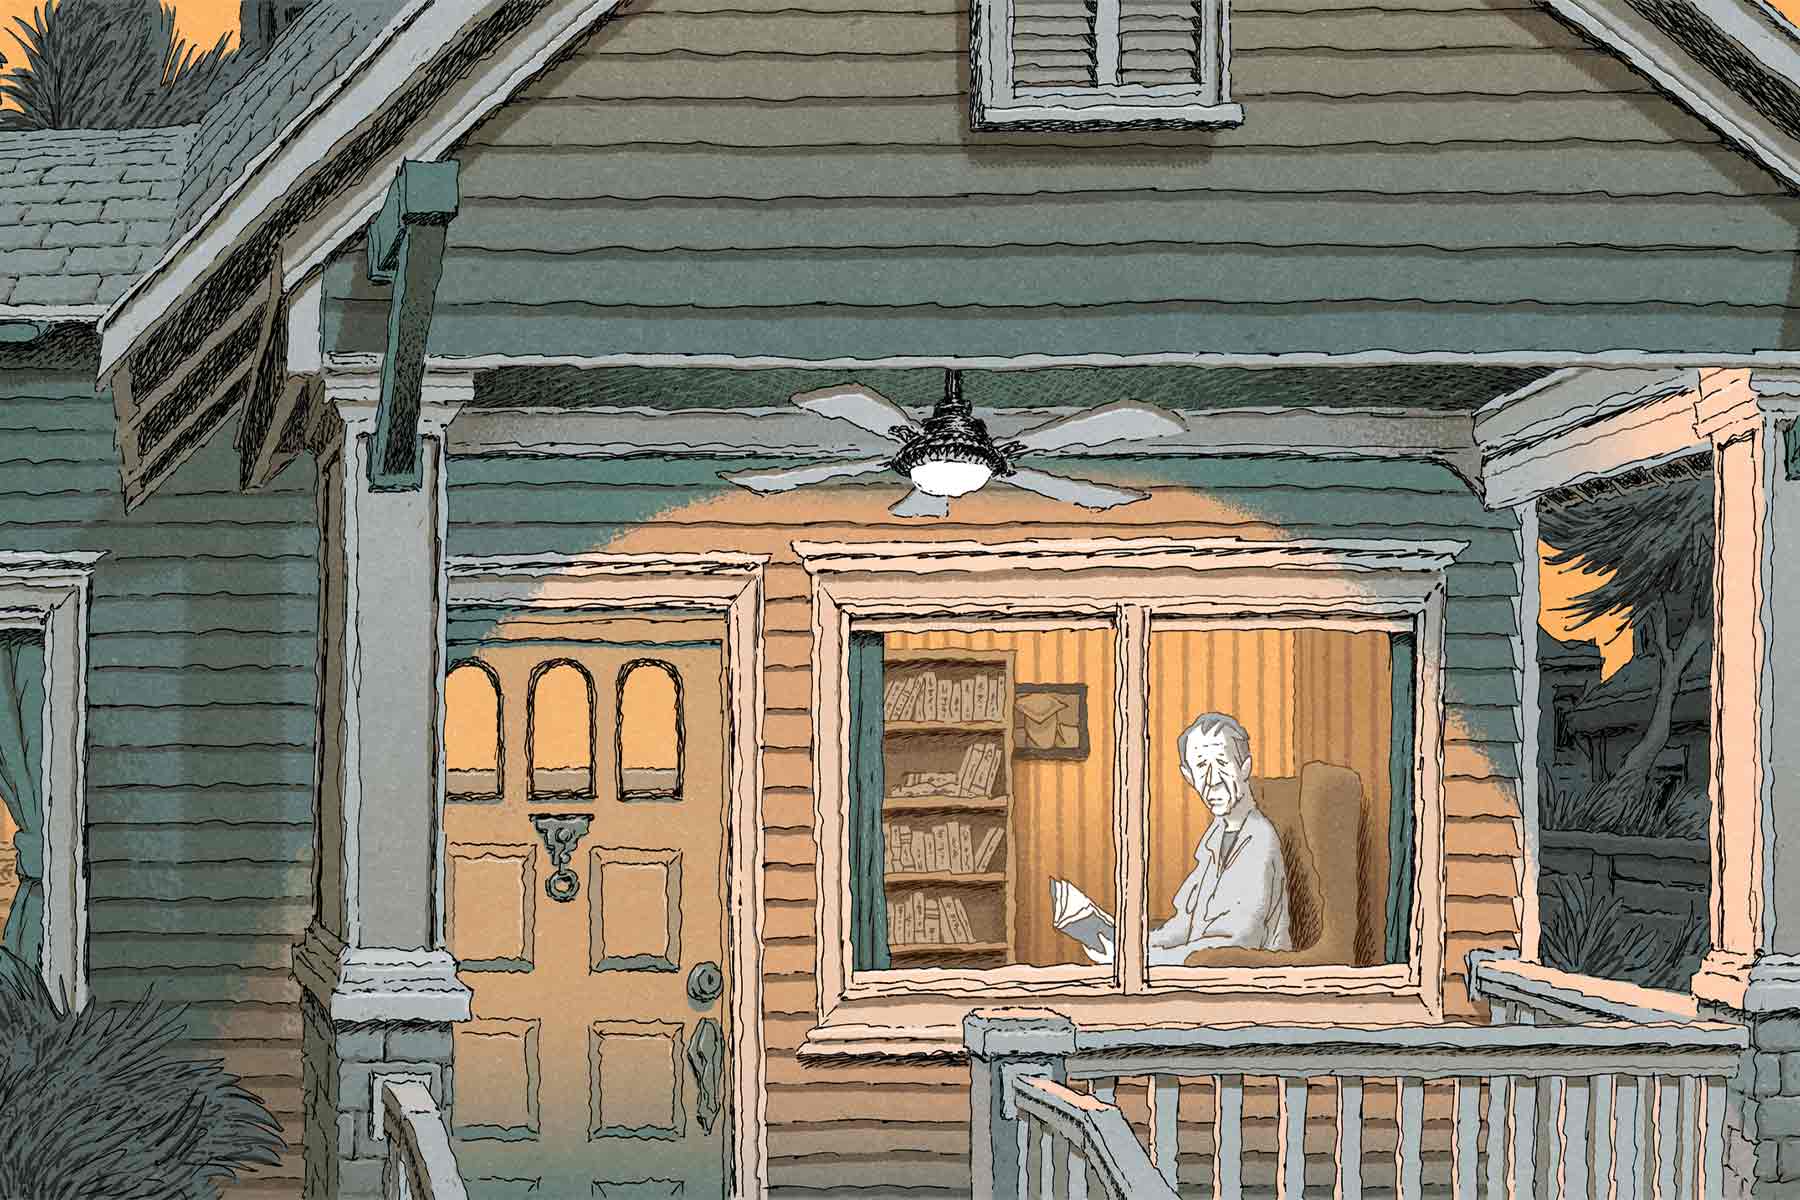 An illustration of a house where a man is looking out the window in the middle of reading a book.